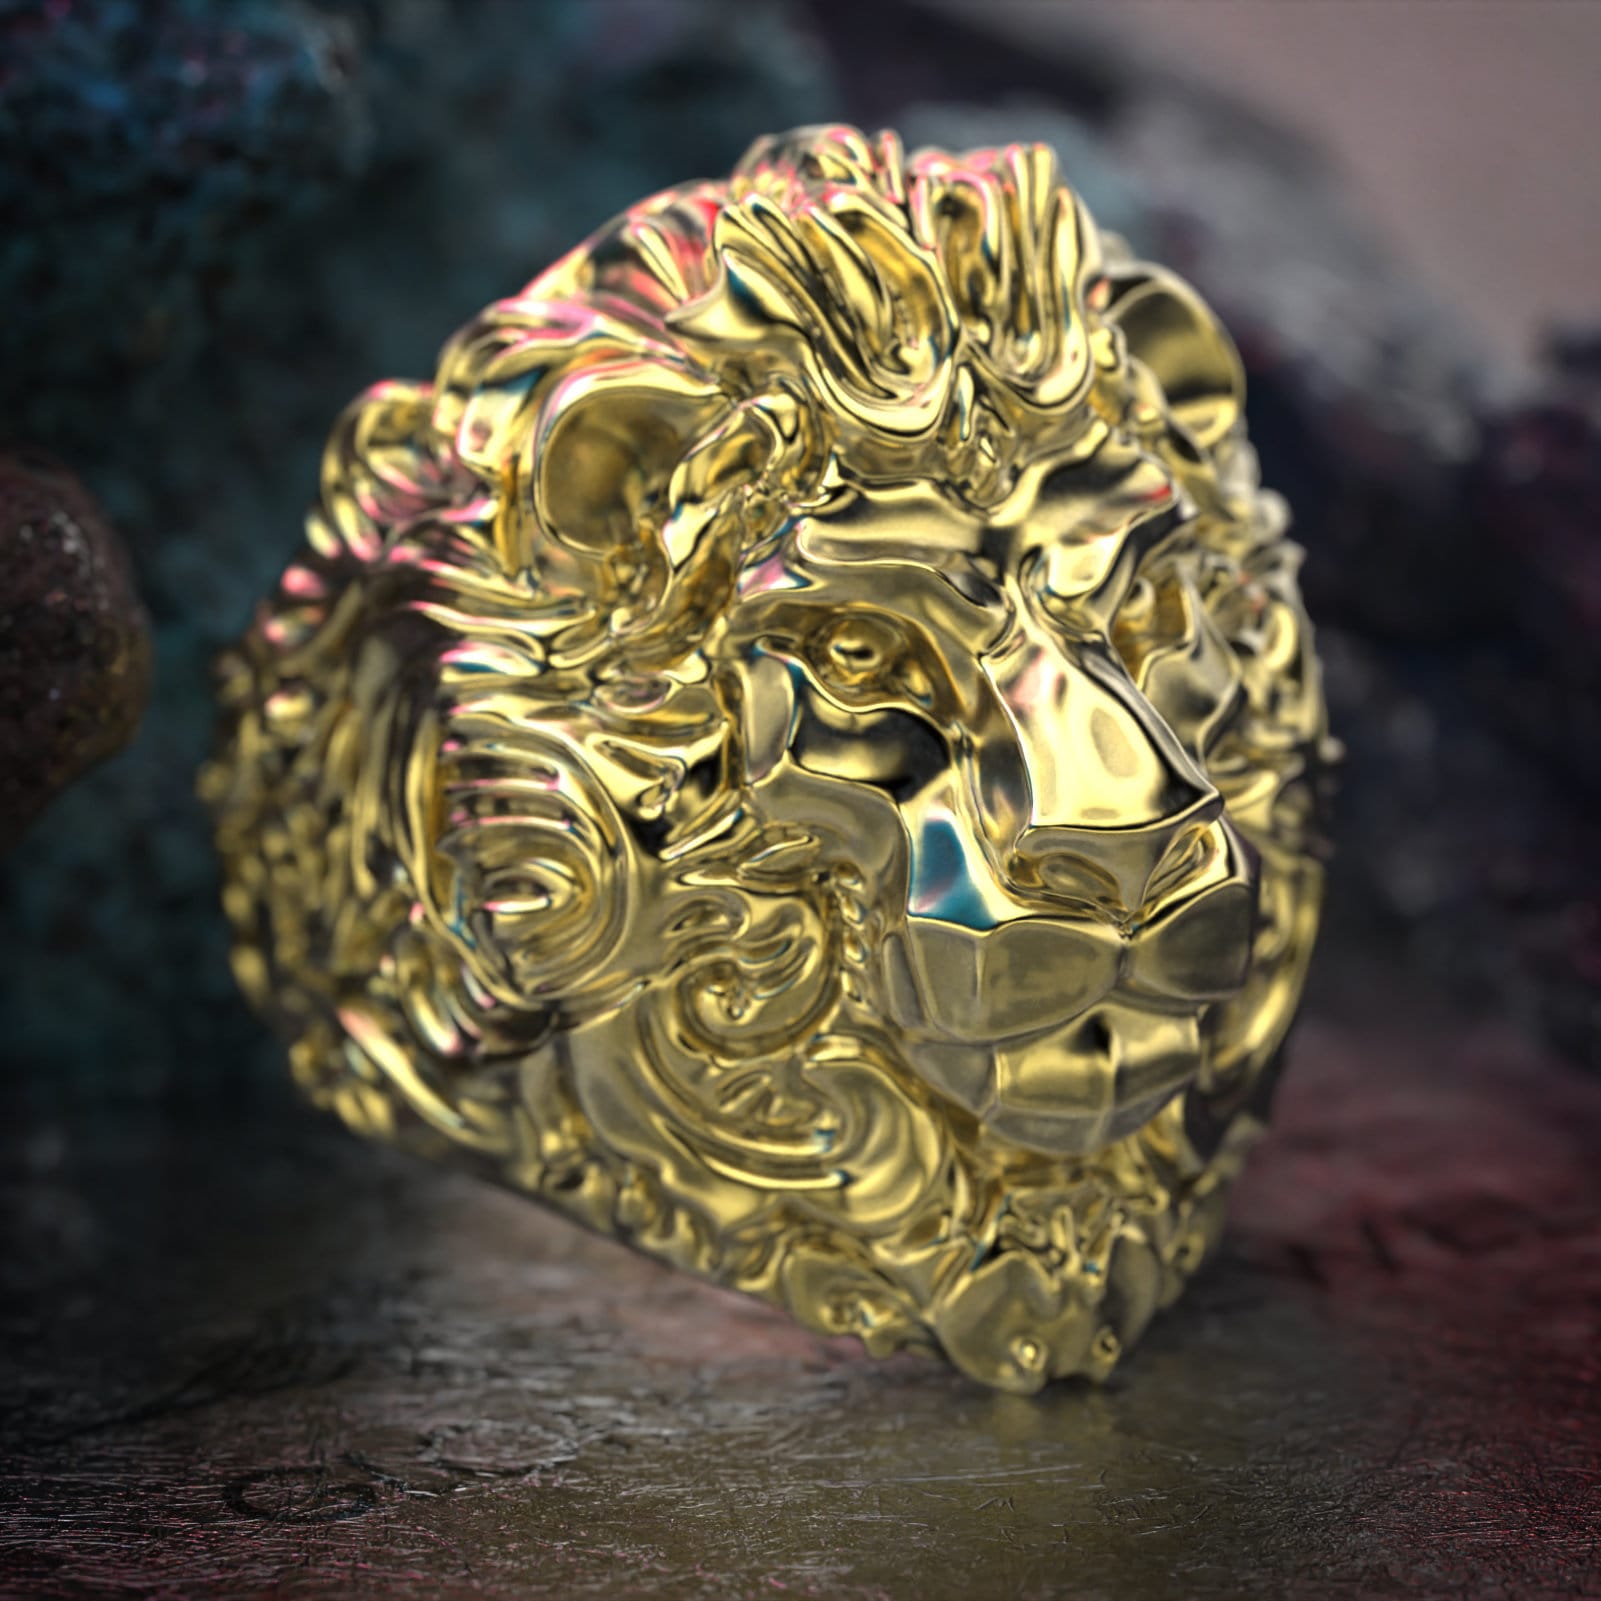 HZMAN Gold Lion Head Ring for Men's Norse Lion Ring Heavy Metal Rock Punk  Style Gothic Totem Amulet Ring (Gold, 9)|Amazon.com